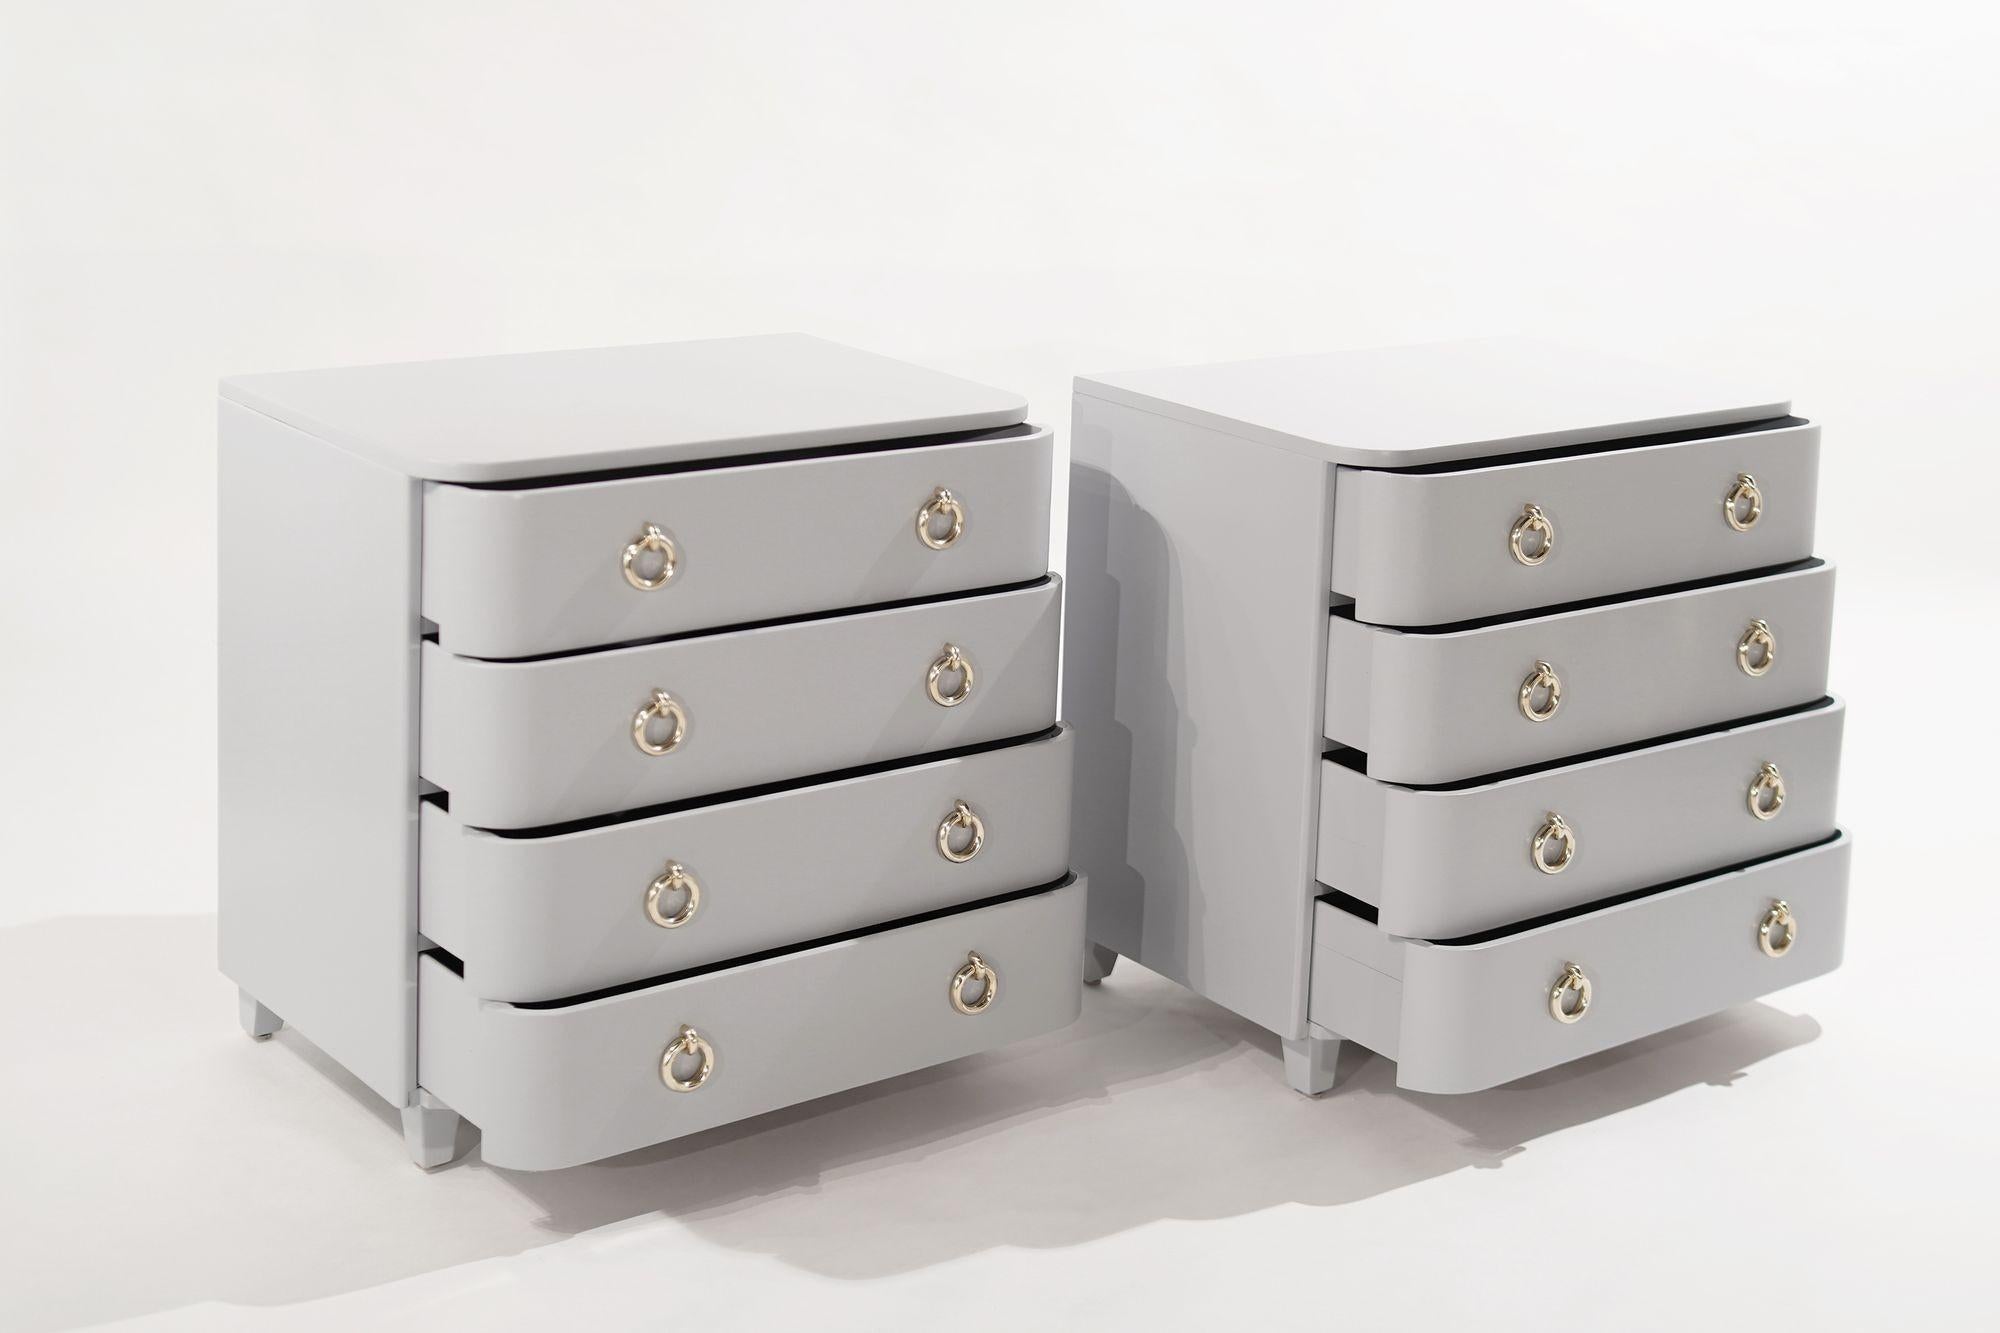 20th Century Set of Modernist Lacquered Bedside Tables, C. 1950s For Sale